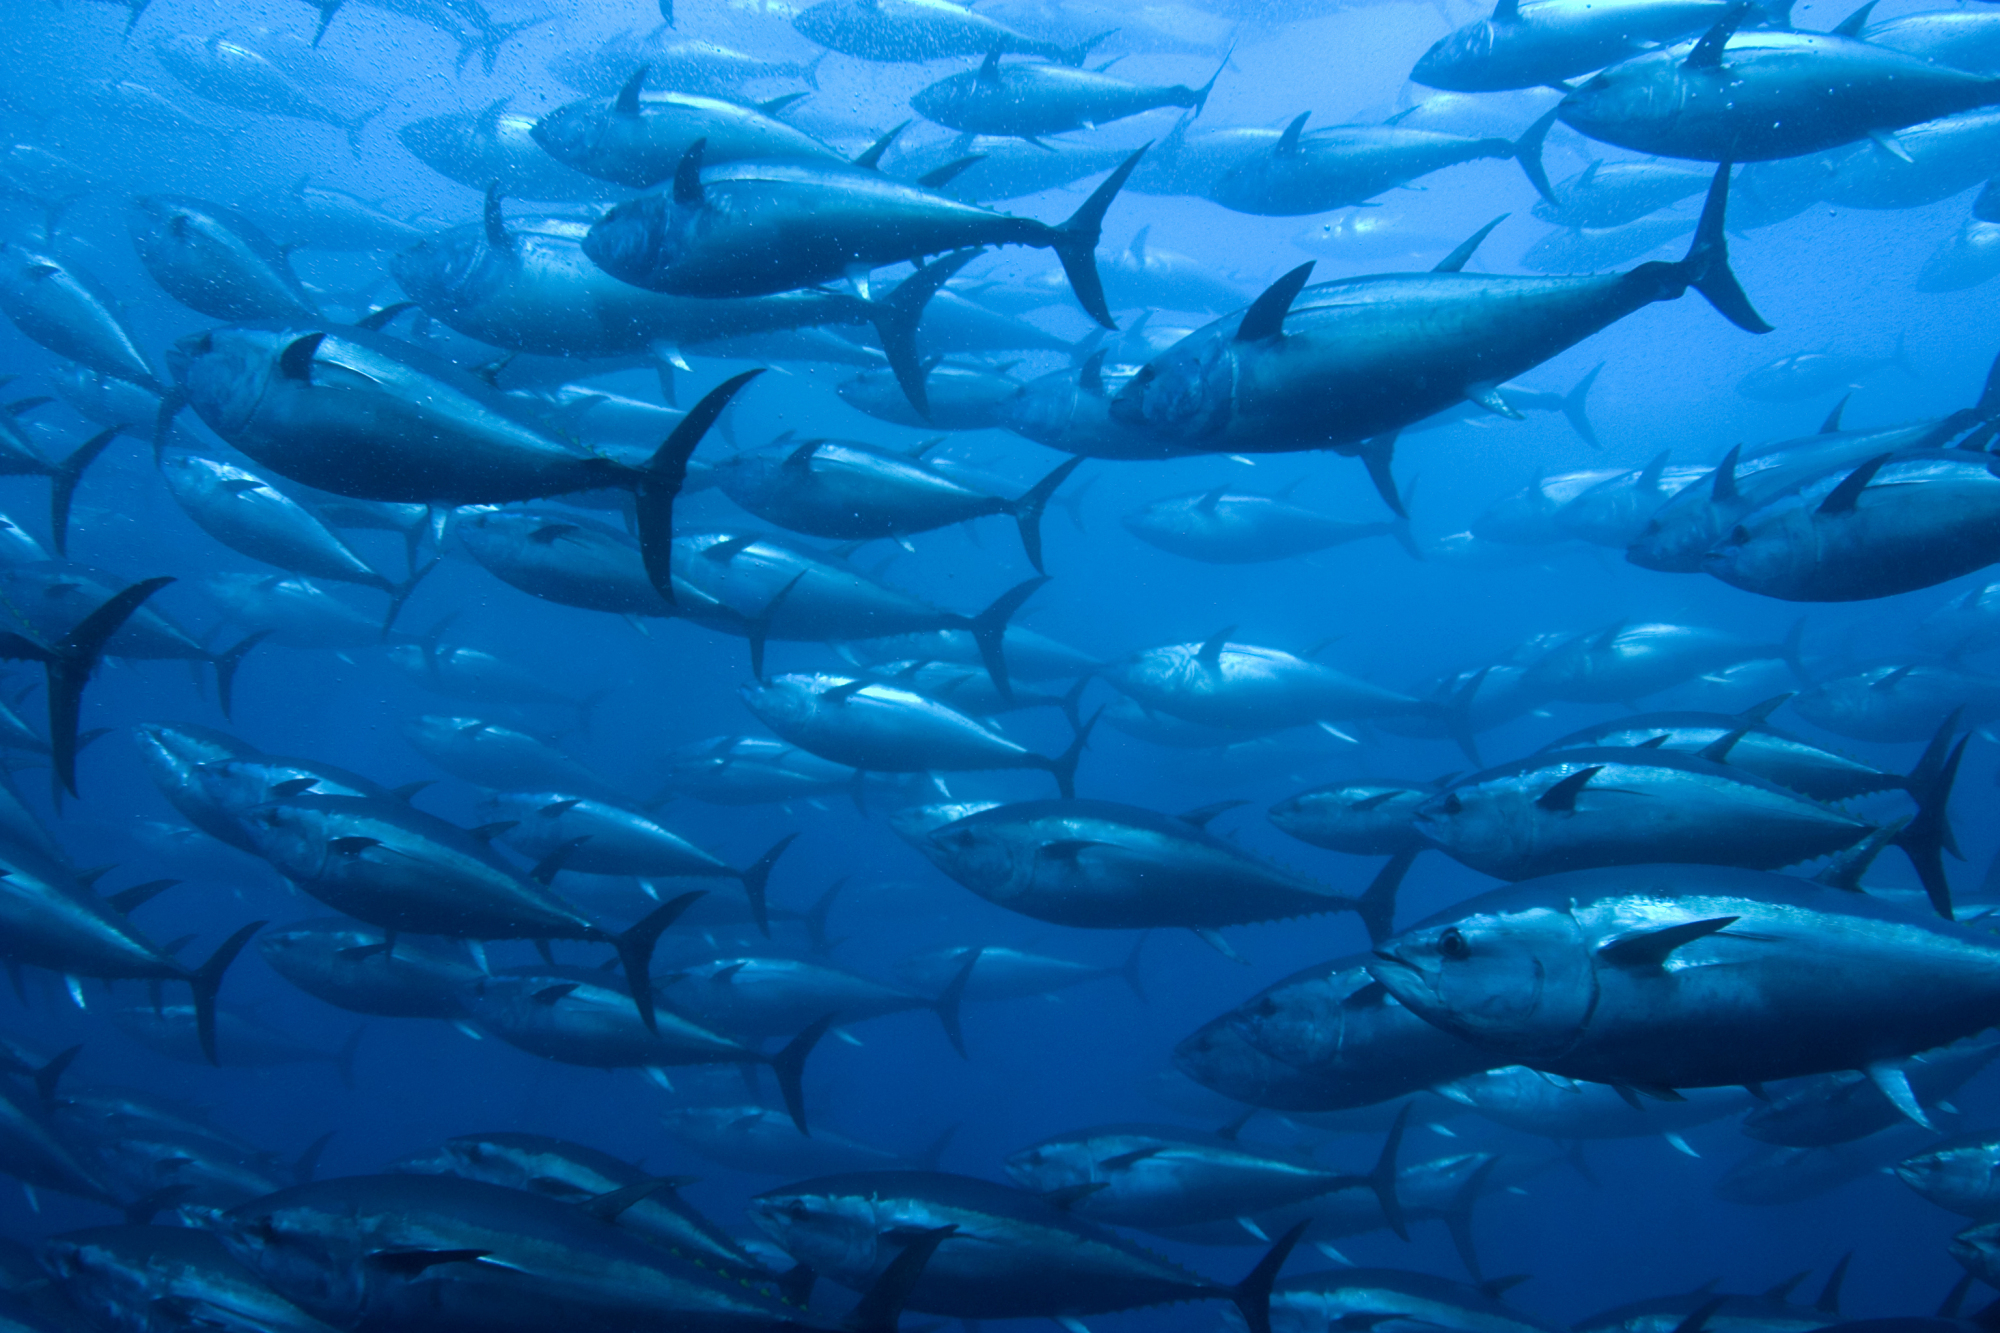 Bluefin tuna are often caught using seine nets, which traps both young and older fish of a whole shoal. | ISTOCK